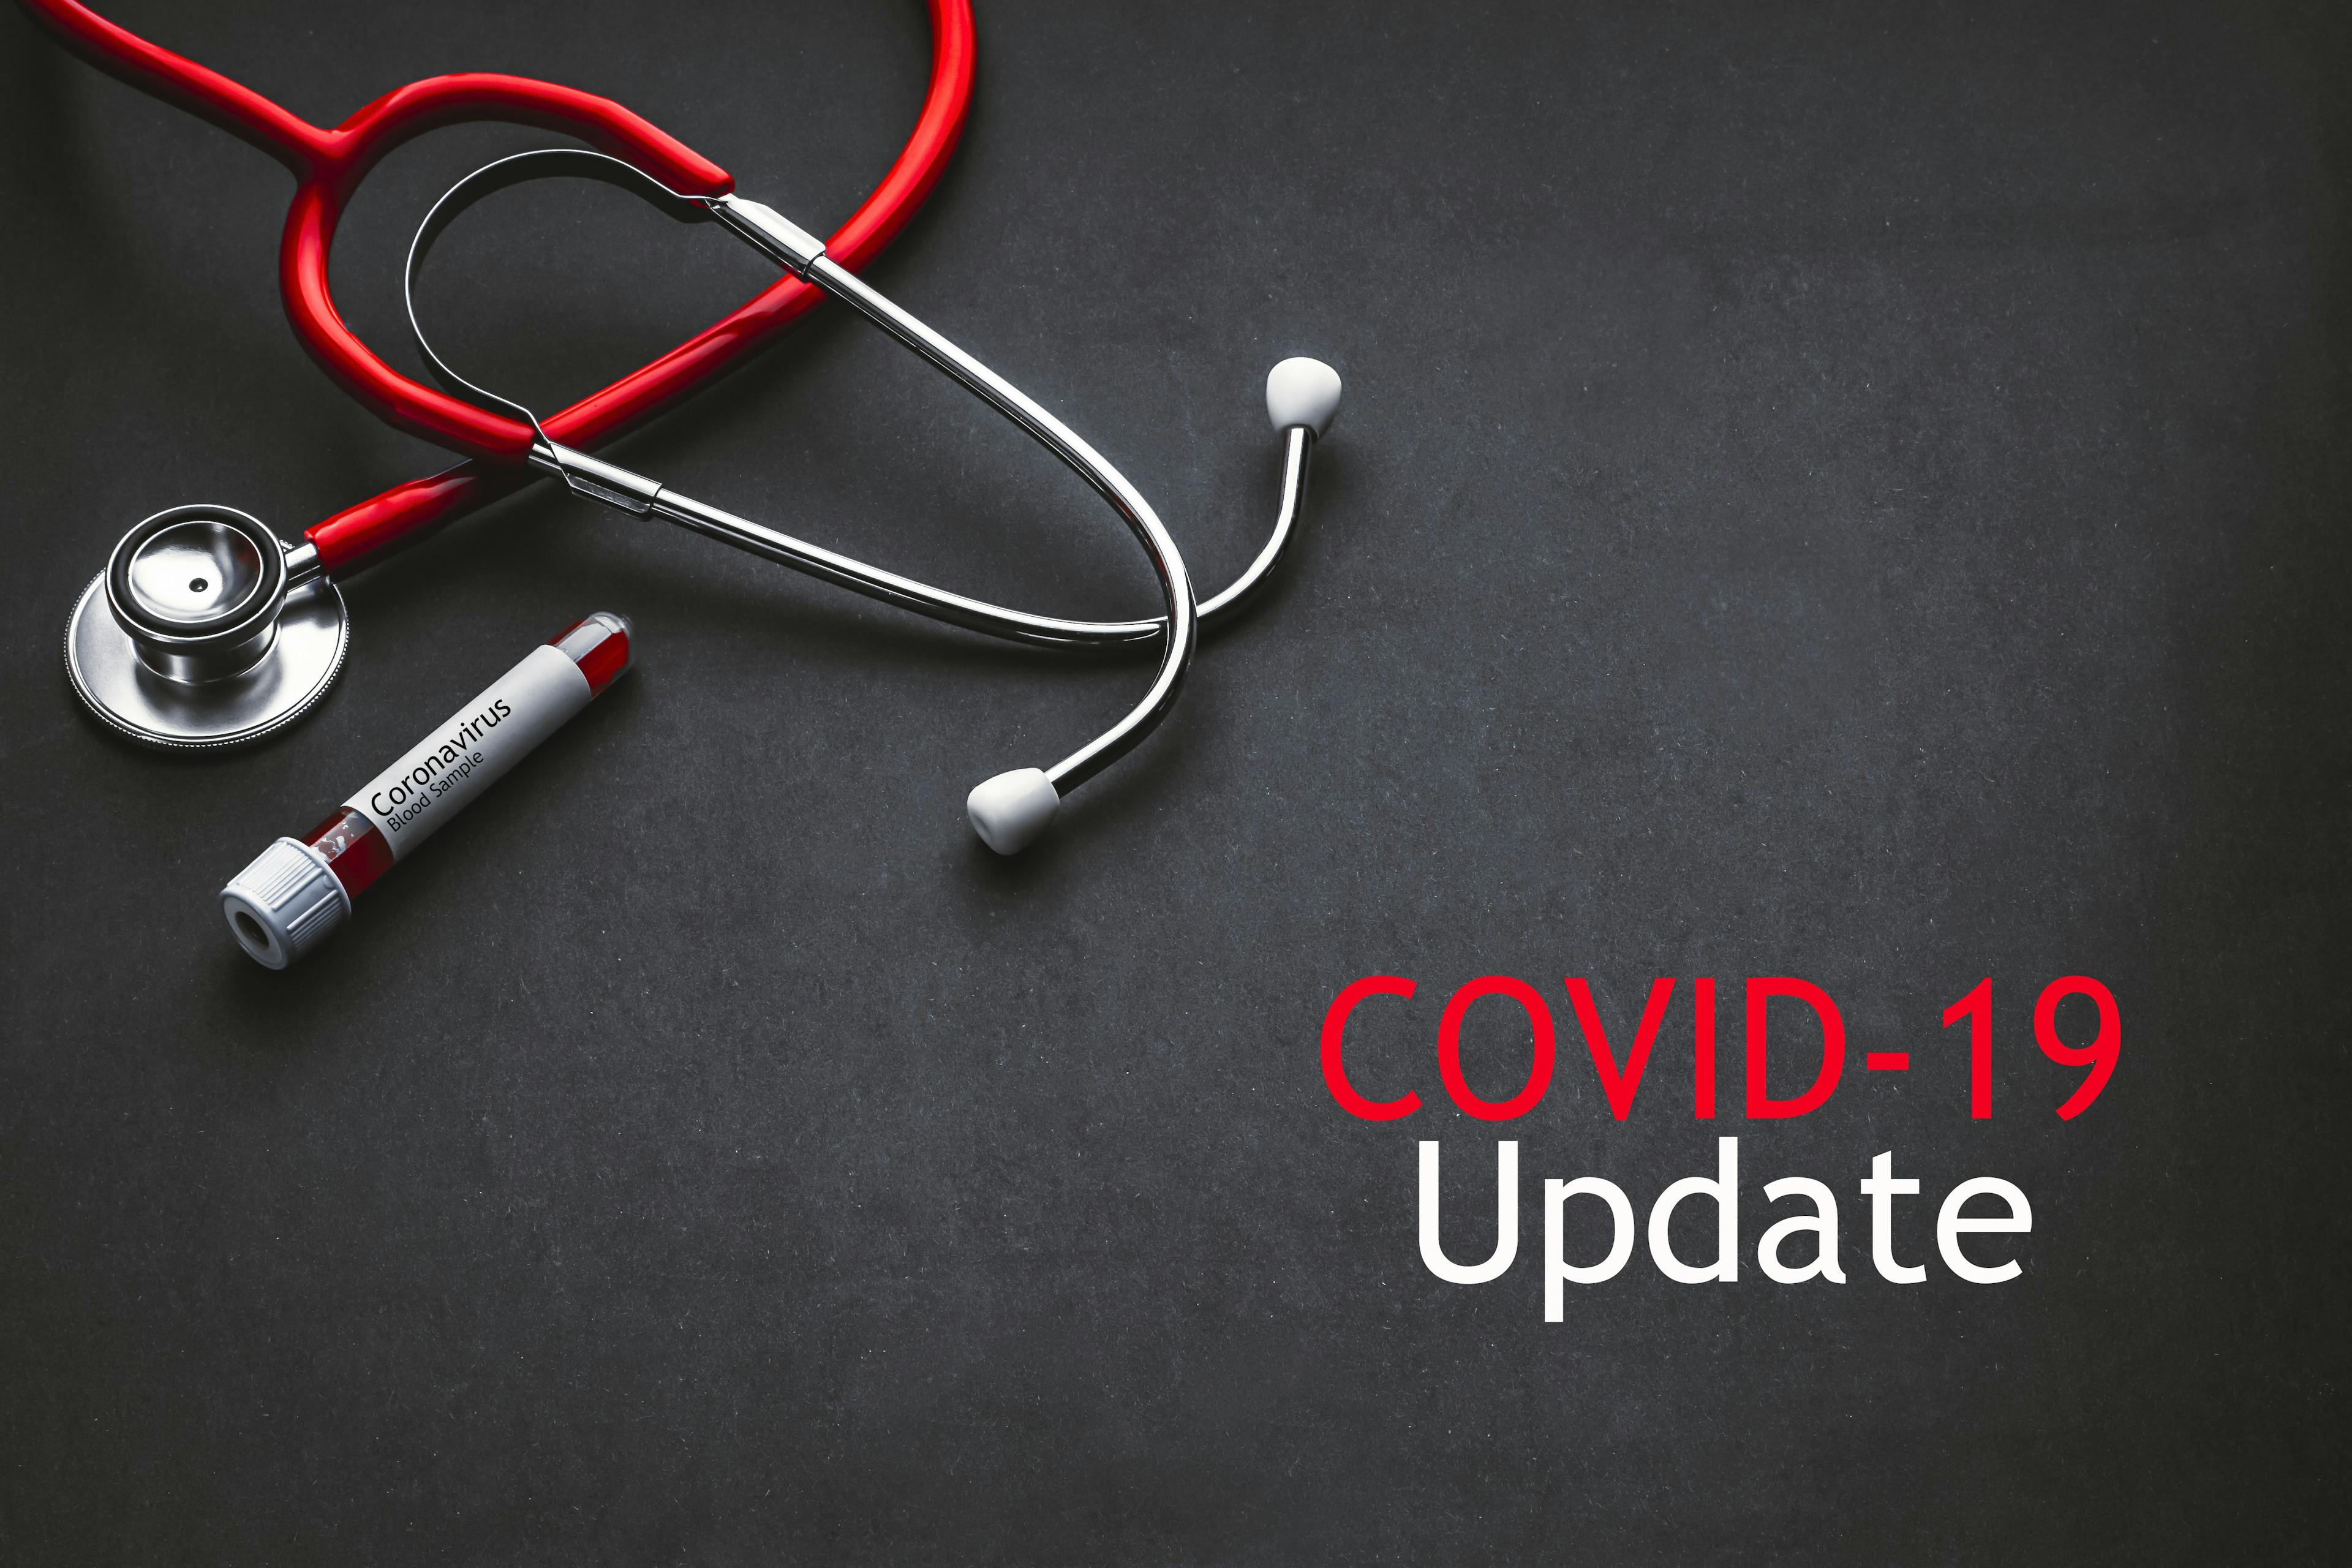 COVID-19 Update: Global Cases and Recoveries as of July 15, 2020